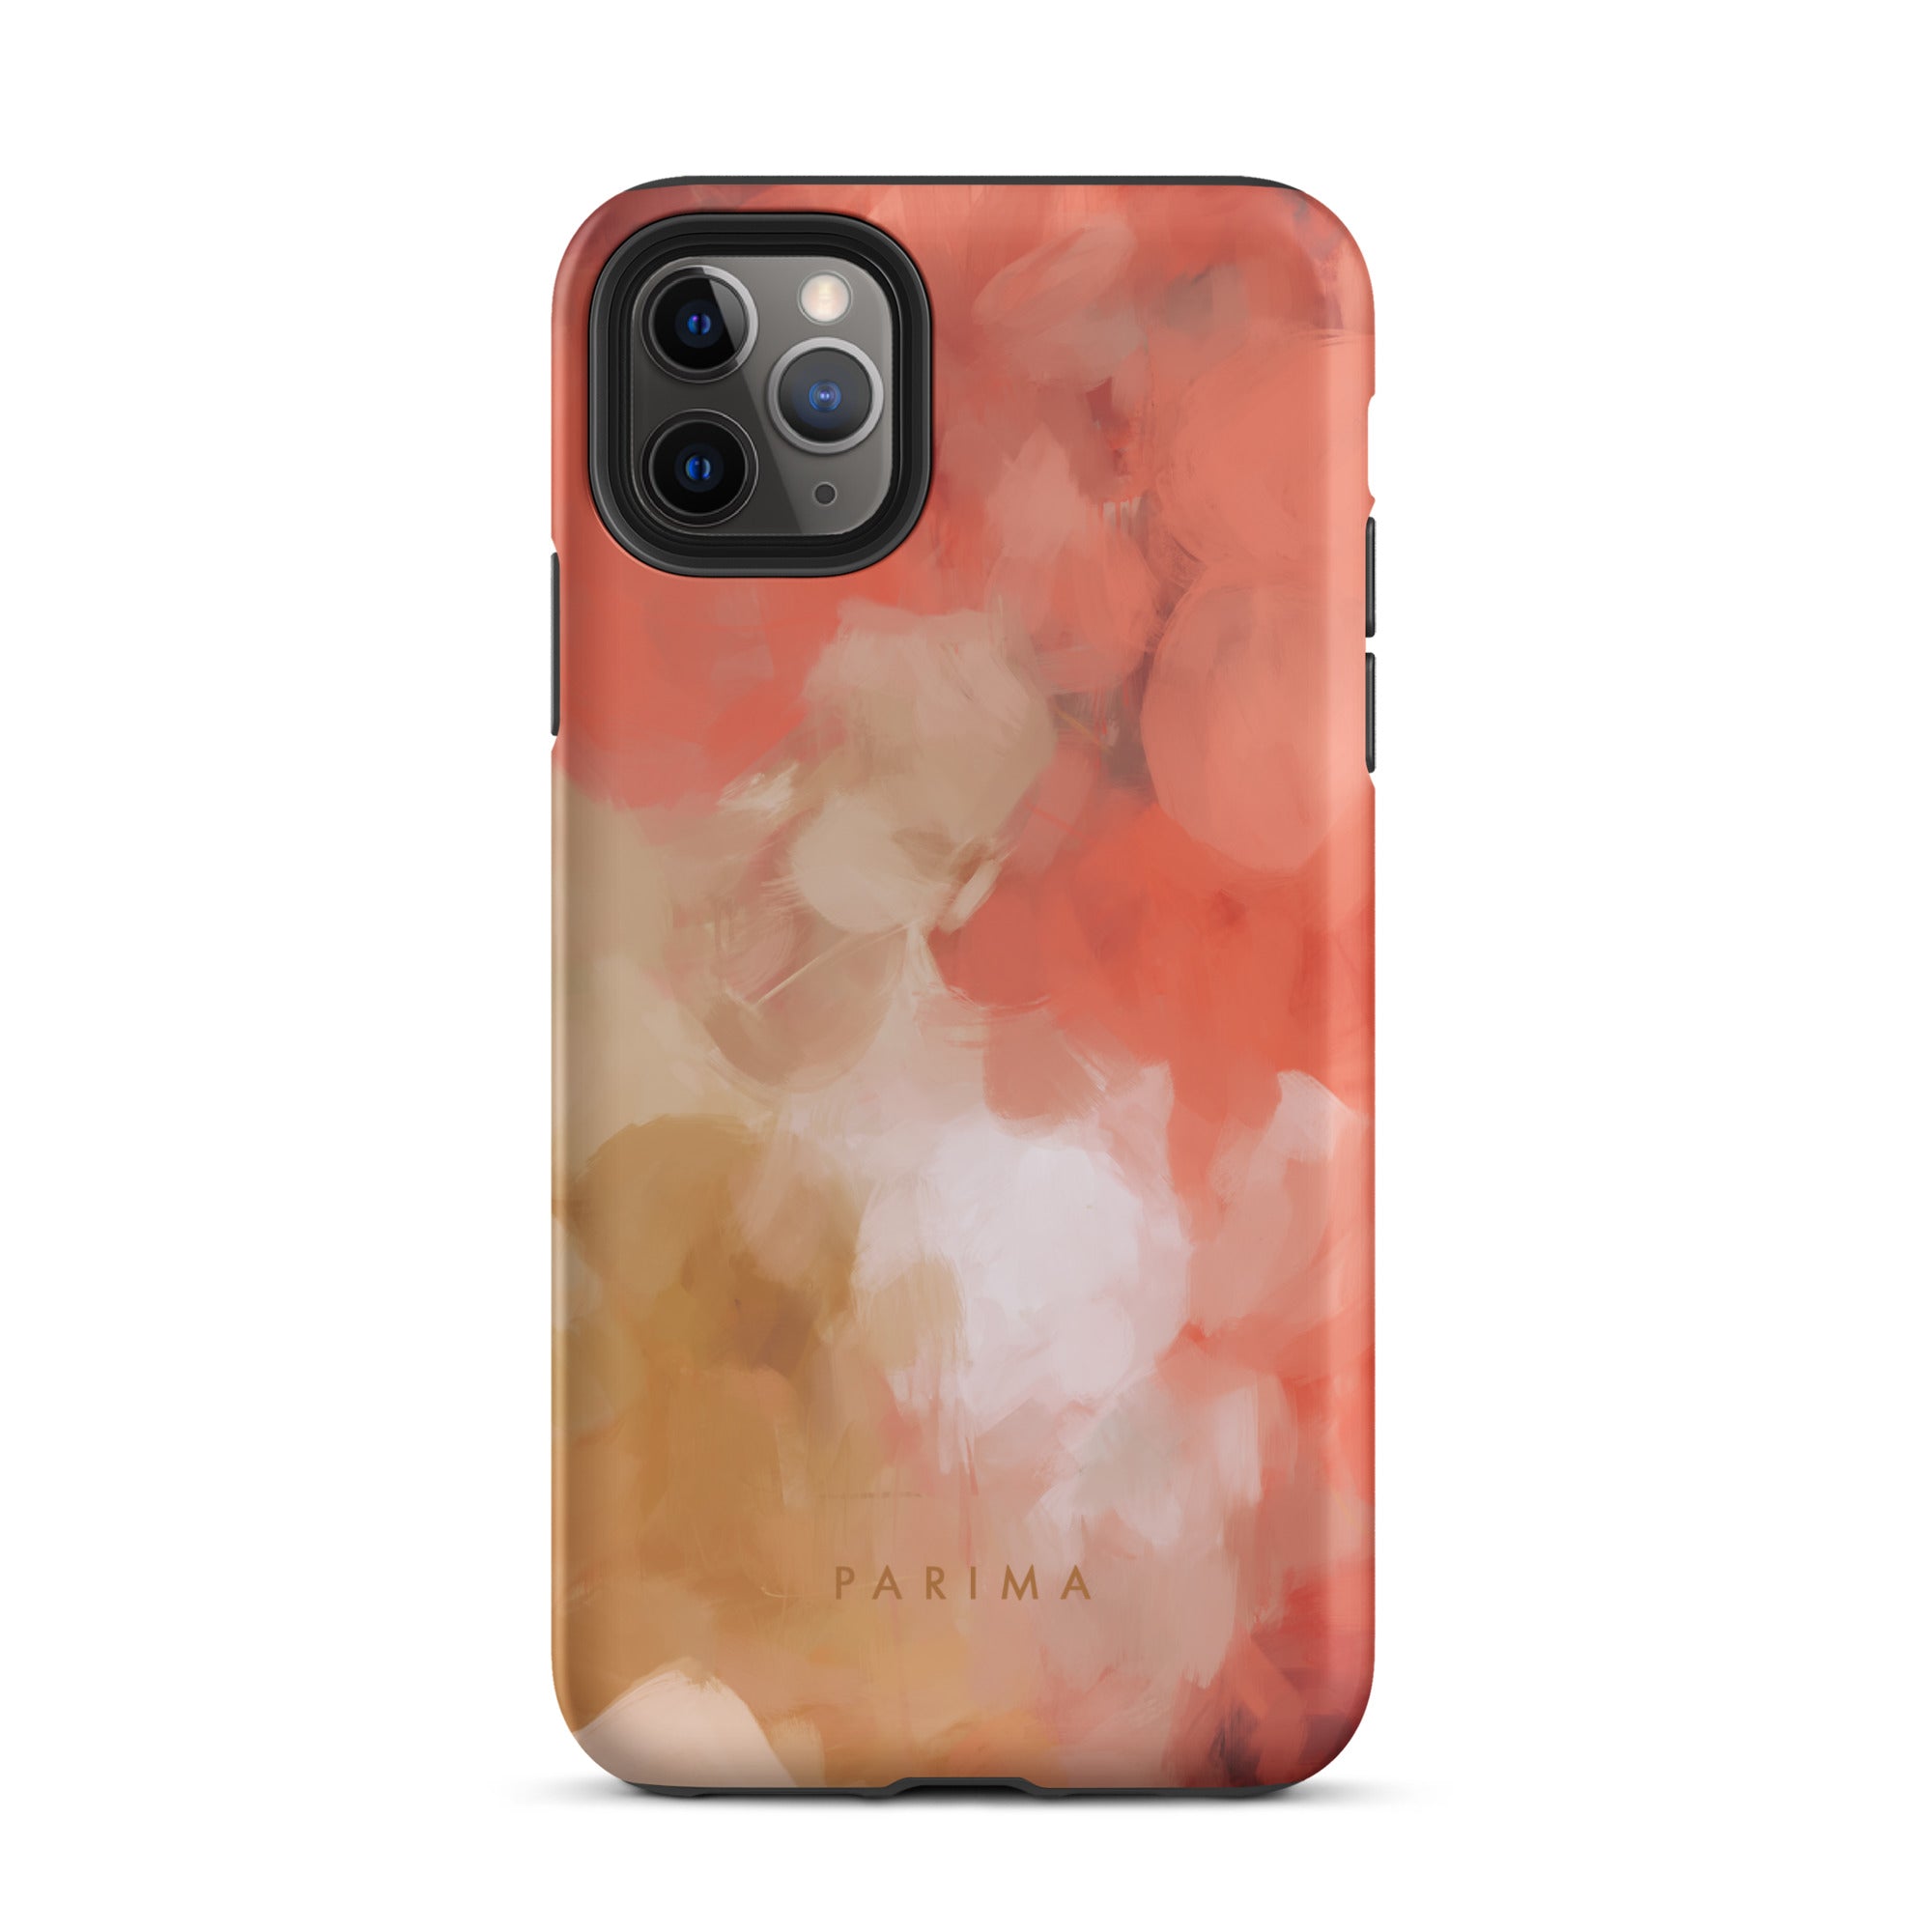 Begonia, pink and gold abstract art - iPhone 11 Pro Max tough case by Parima Studio